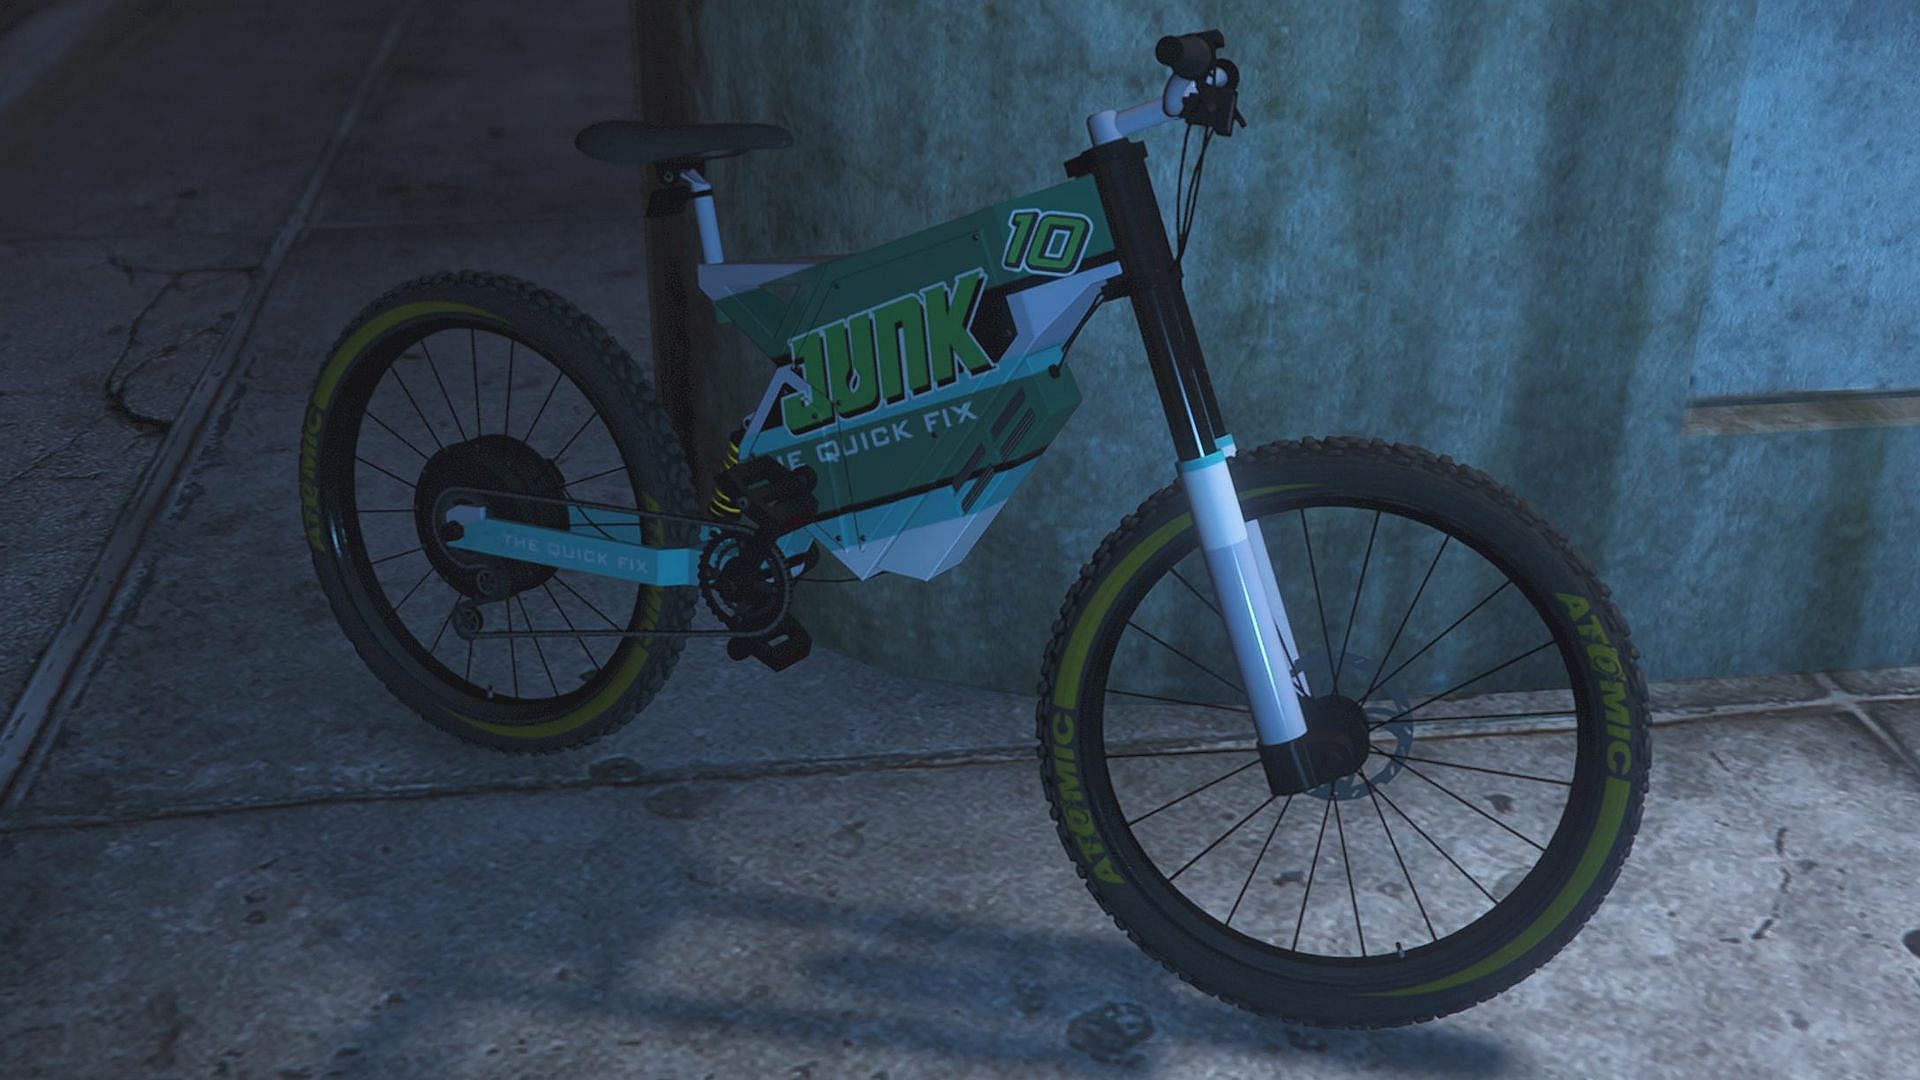 Players will ride an electric bicycle to complete this content (Image via Rockstar Games)